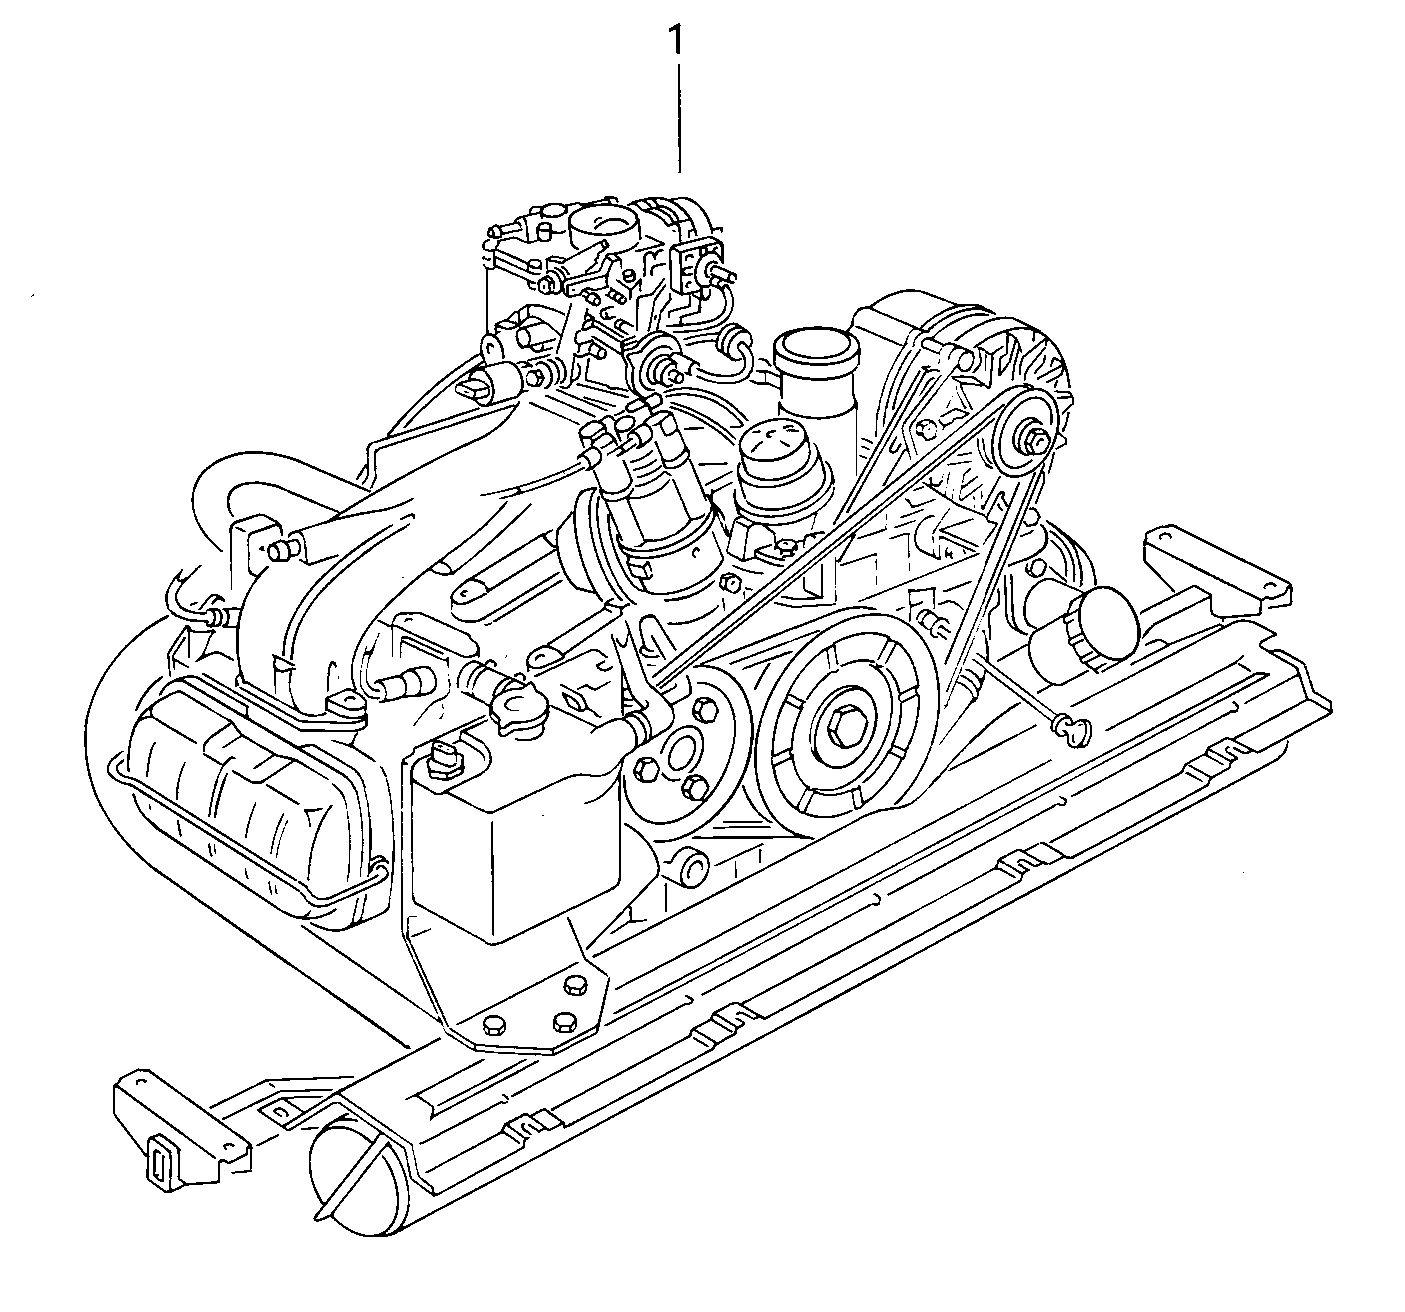 base engine with crankshaft<br>pistons, cylinder head,<br>complete,oil pump and flywheel  - Typ 2/syncro - t2